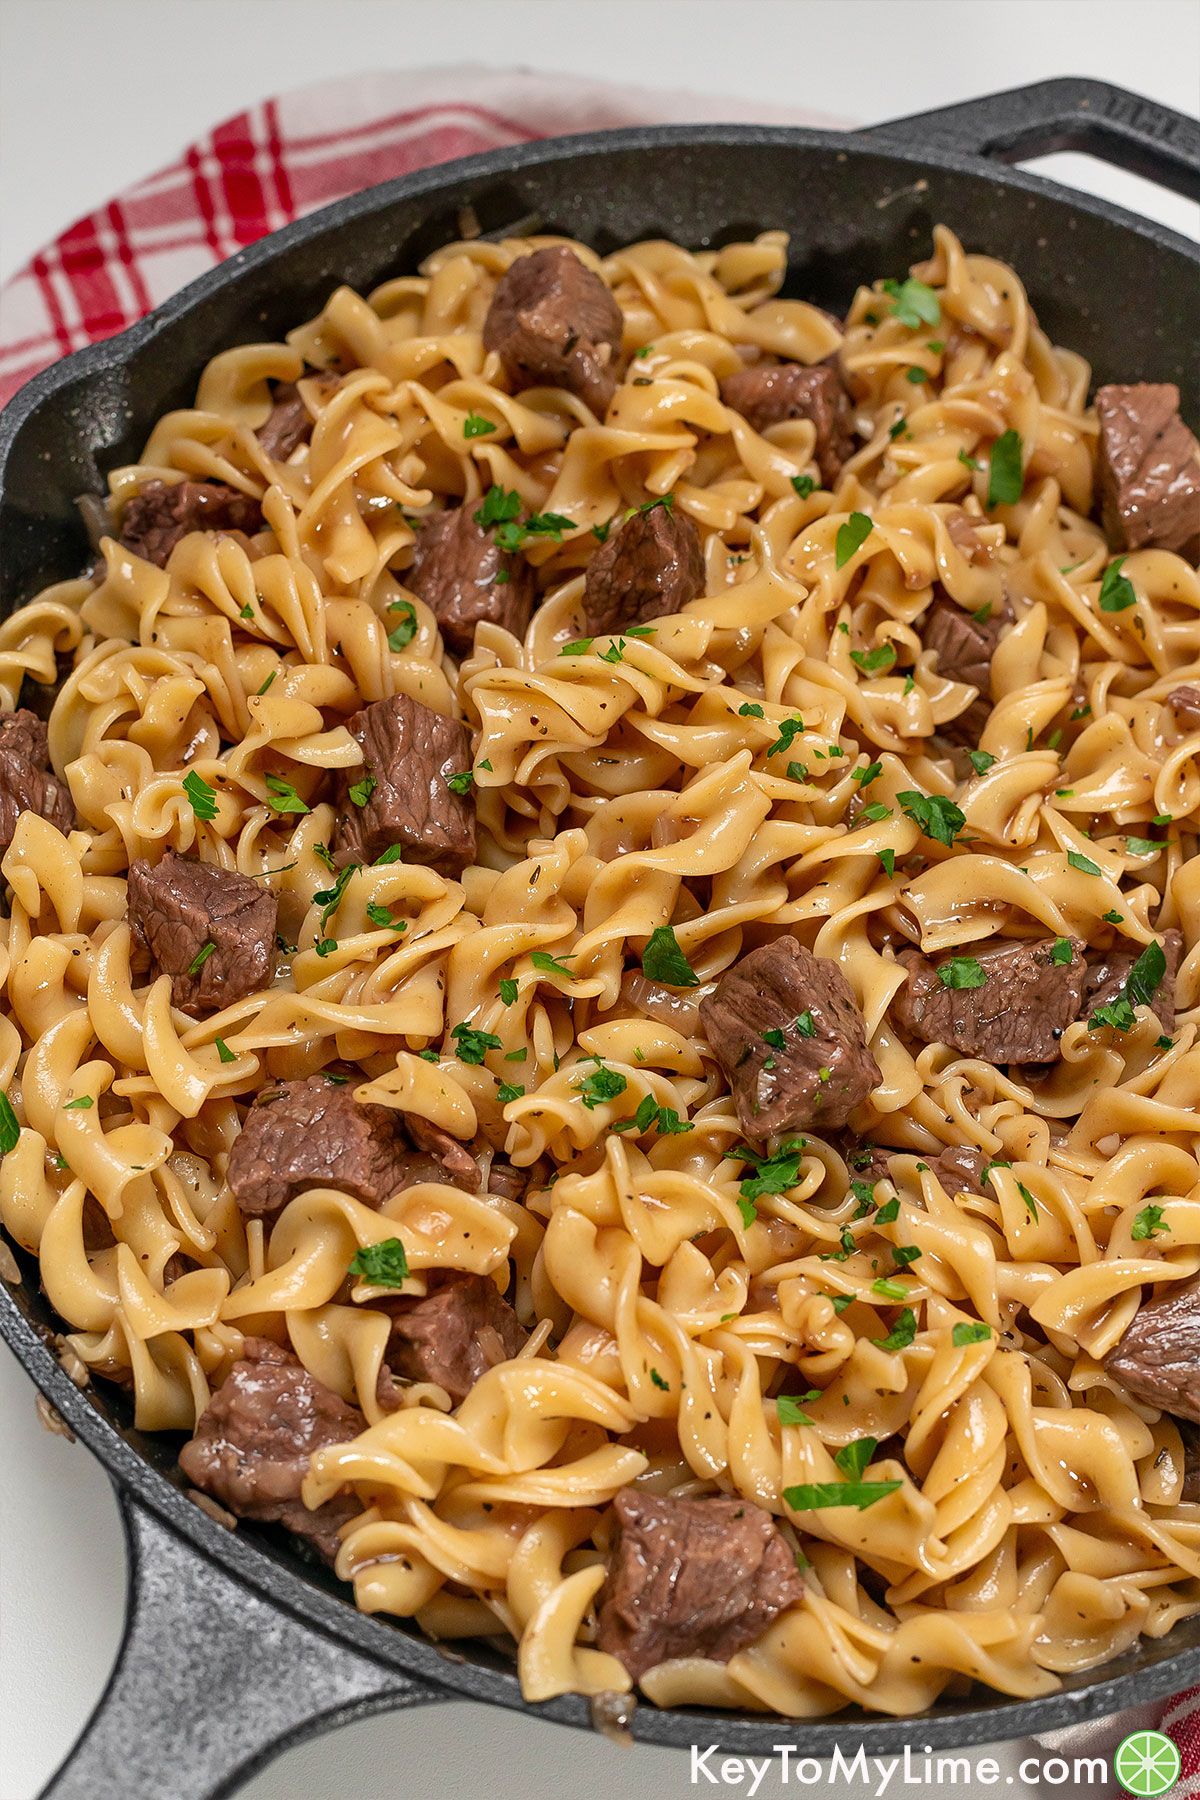 Tender and savory beef tips and noodles served in a large iron skillet with fresh parsley throughout.